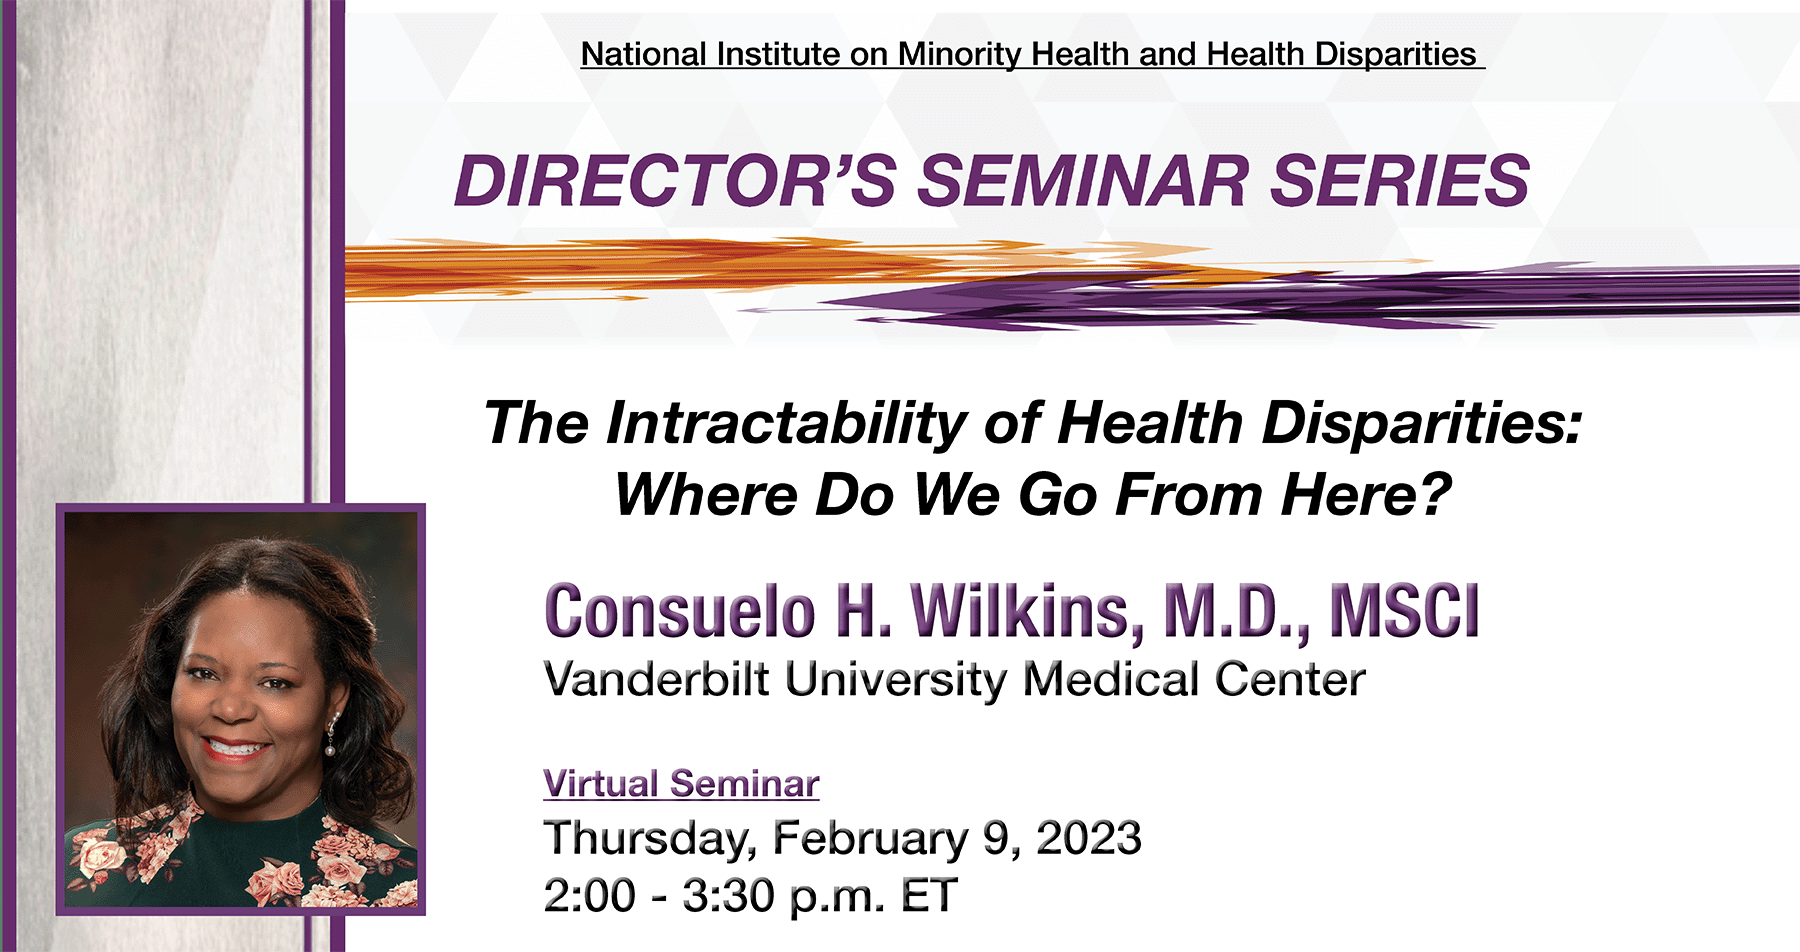 Dr. Consuelo H. Wilkins, Vanderbilt University Medical Center, presents "The Intractability of Health Disparities: Where Do We Go From Here?"